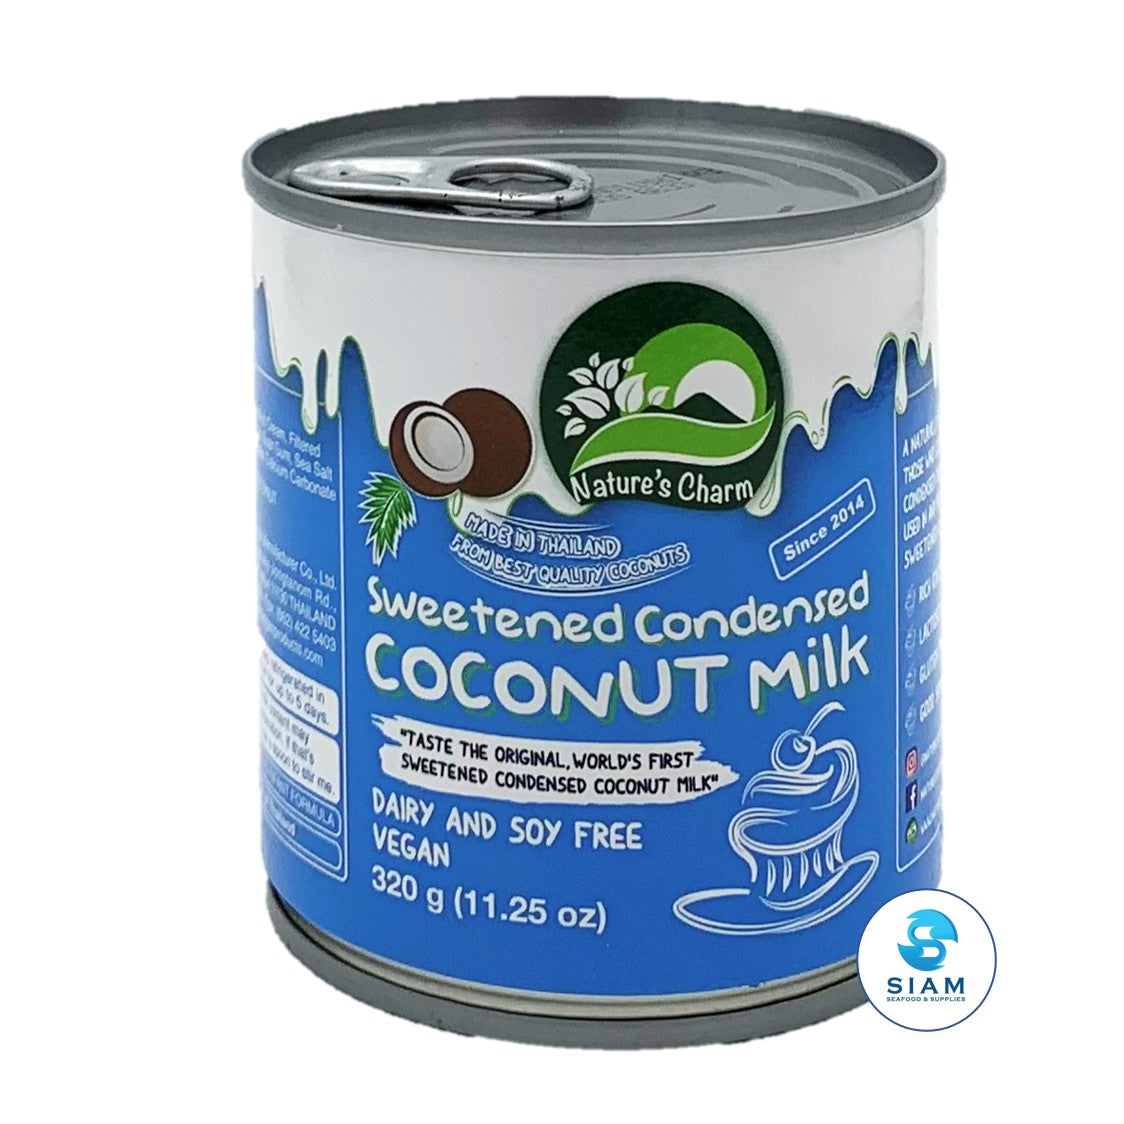 Sweetened Condensed Coconut Milk, Vegan, Dairy & Soy Free - Nature's Charm (11.25 oz -Net Wt 15.6 oz)  shippable Nature's Charm